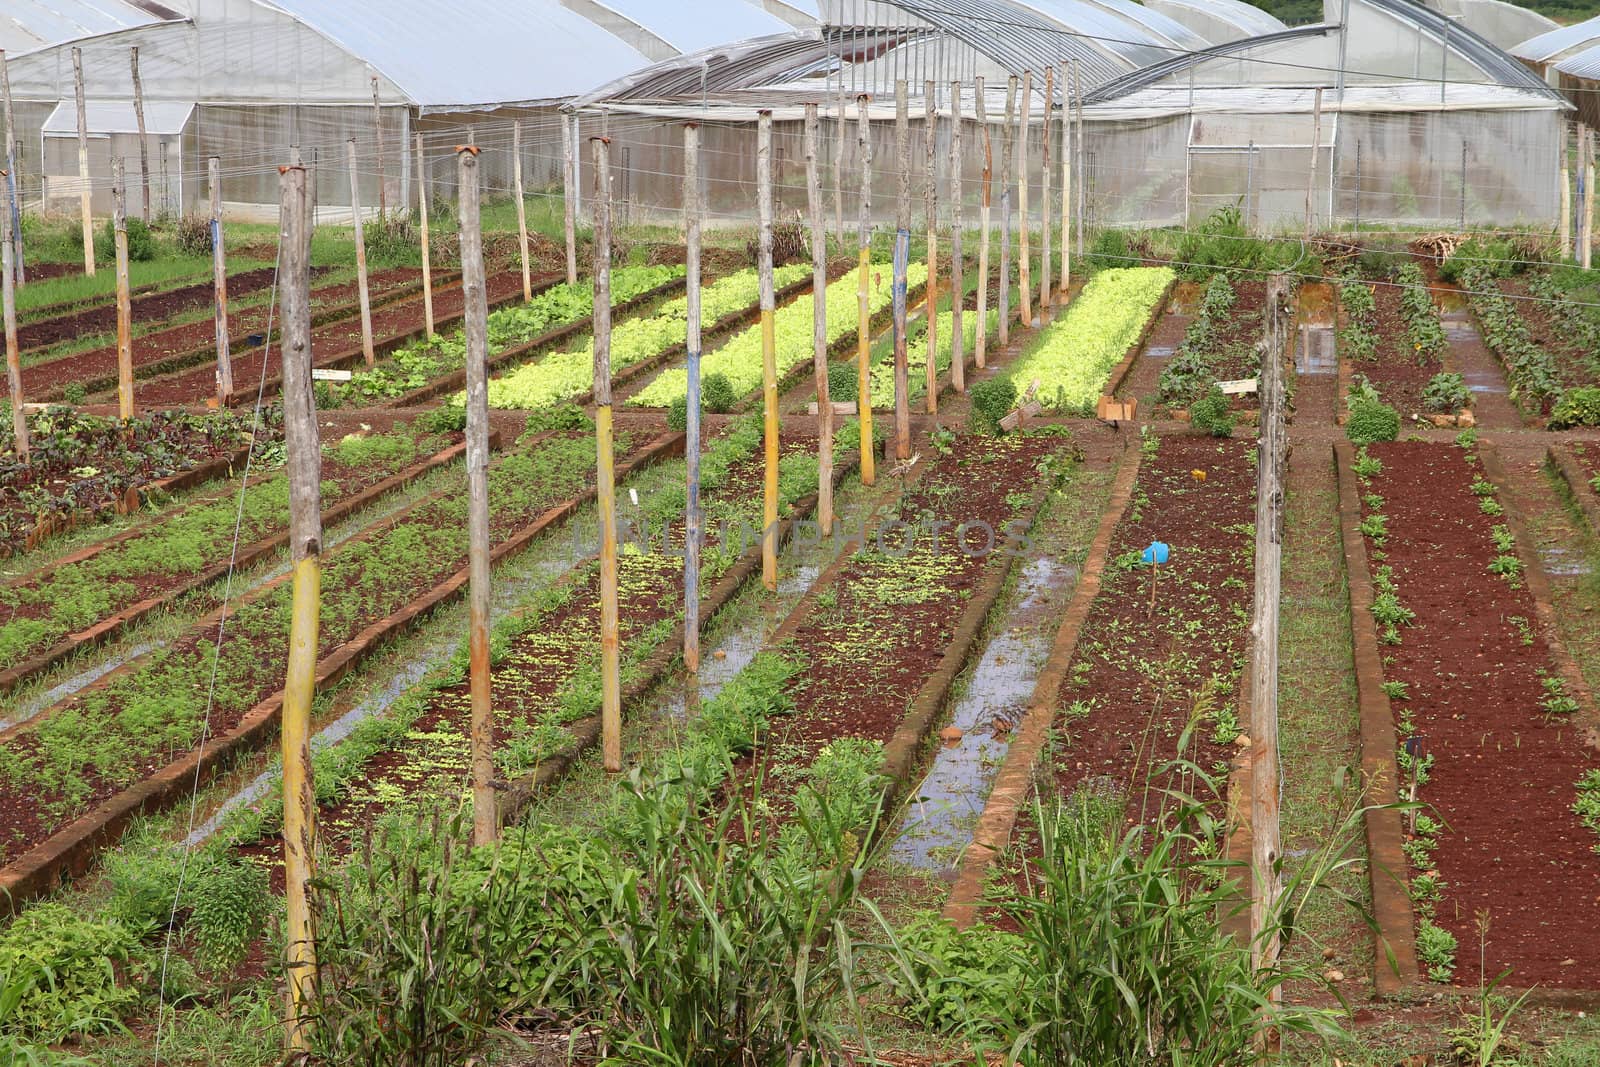 Baracoa, Cuba - vegetable fields and greenhouses, Cuban farming and agriculture